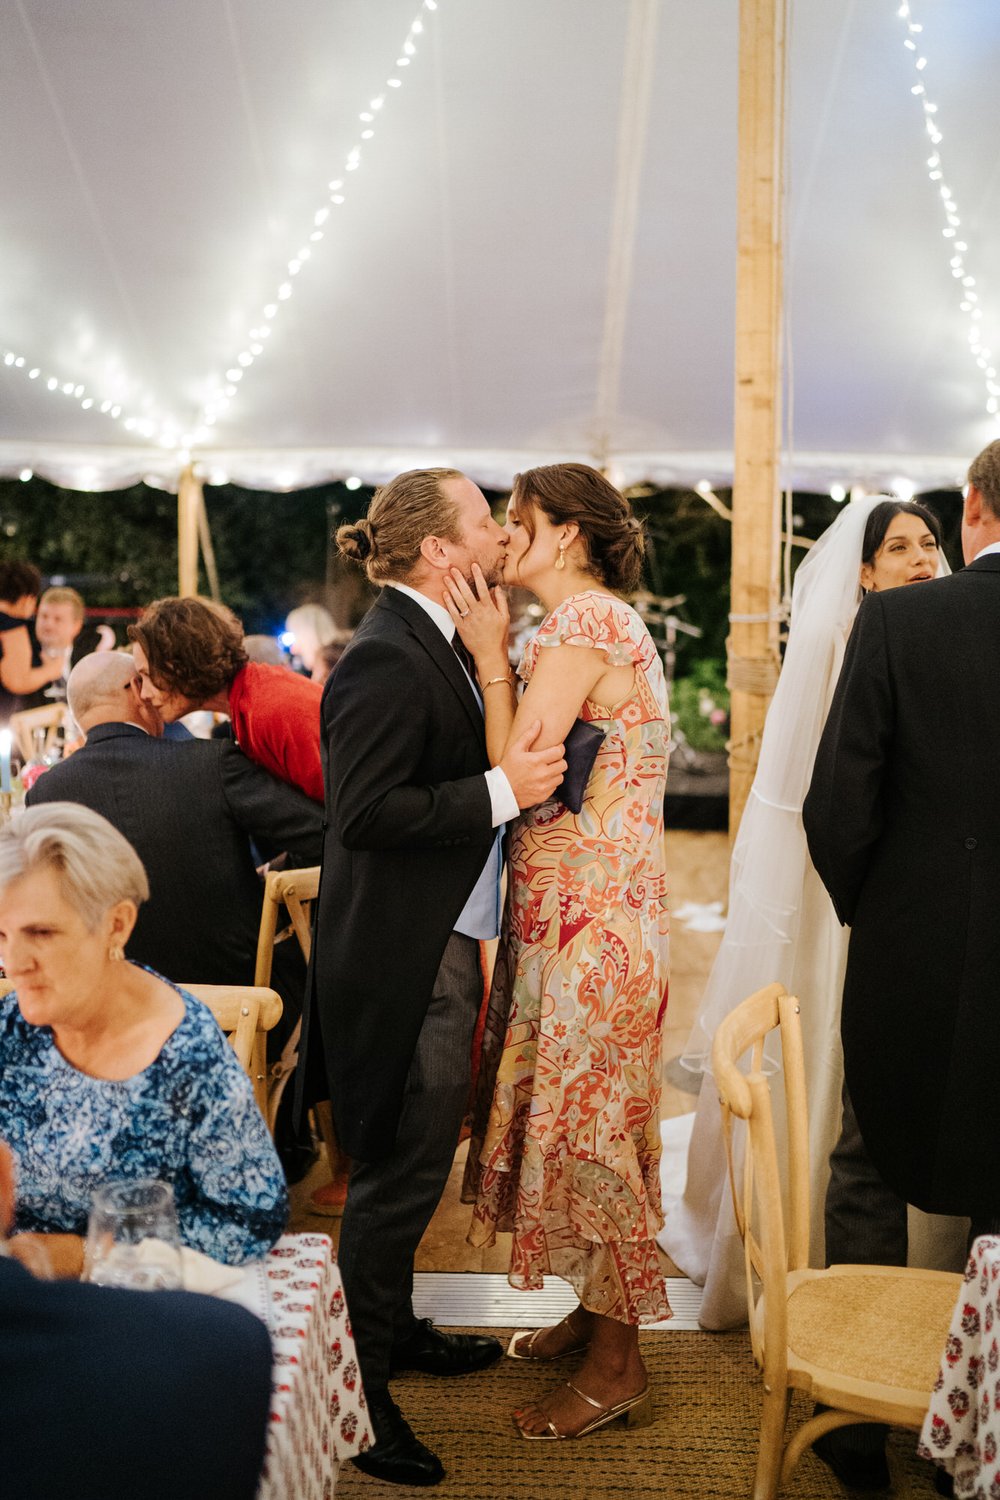 Two guests kiss and embrace in sneaky candid photograph taken during break after wedding speeches took place